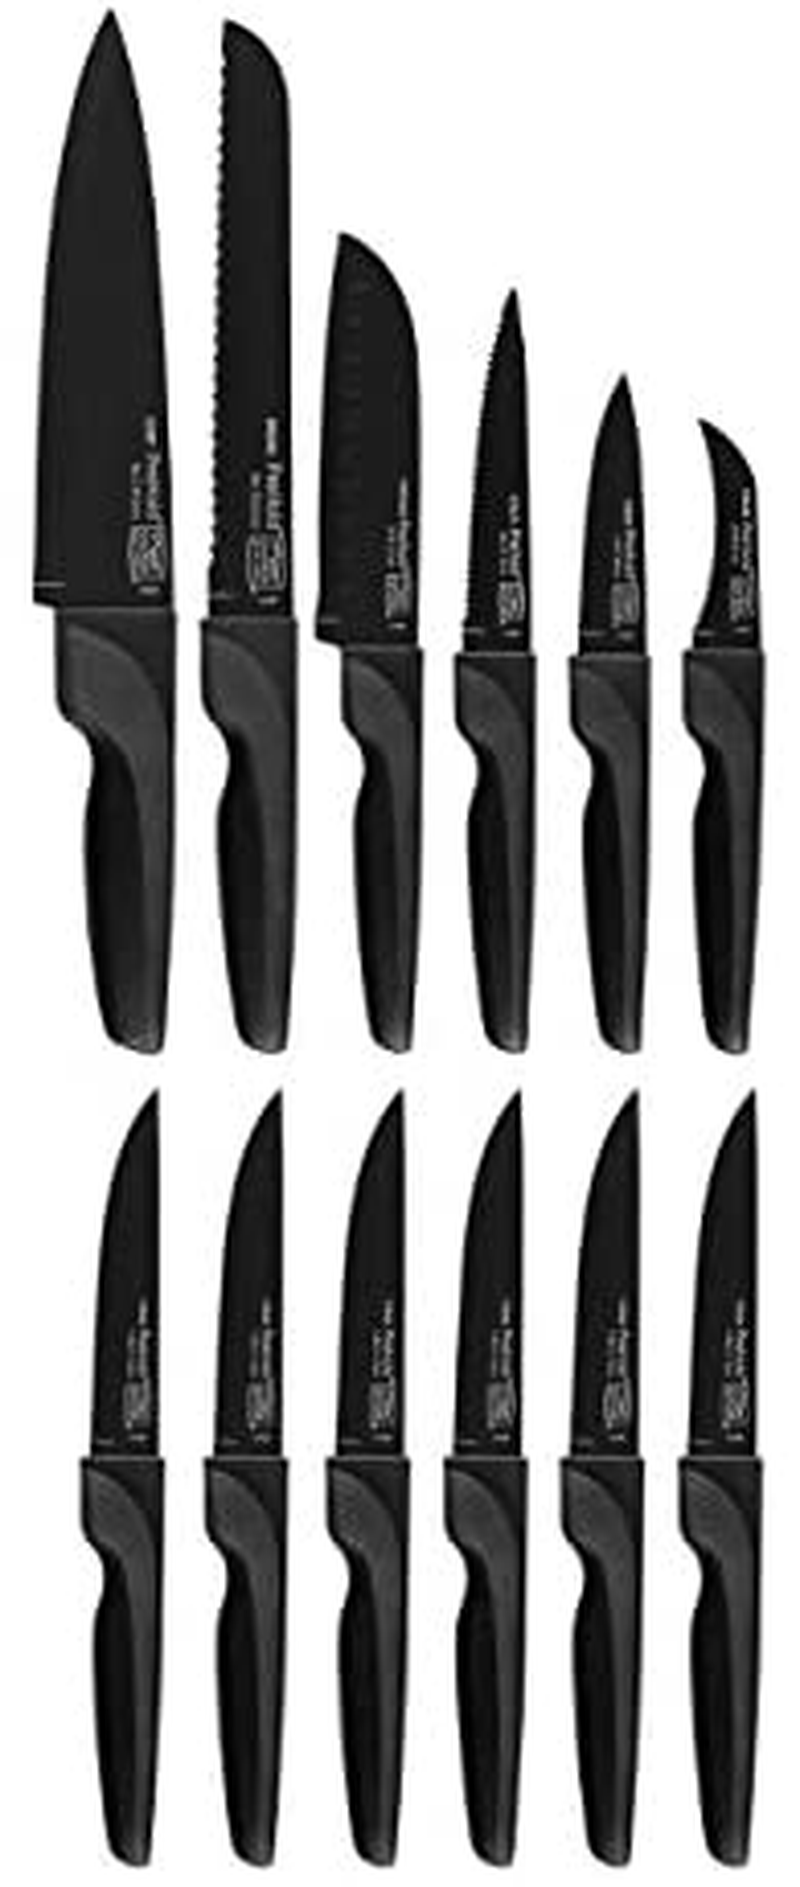 Chicago Cutlery ProHold Dual Knife Block Set with Non-Stick Coating (14-Piece) Home & Garden > Kitchen & Dining > Tableware > Flatware > Flatware Sets Chicago Cutlery   